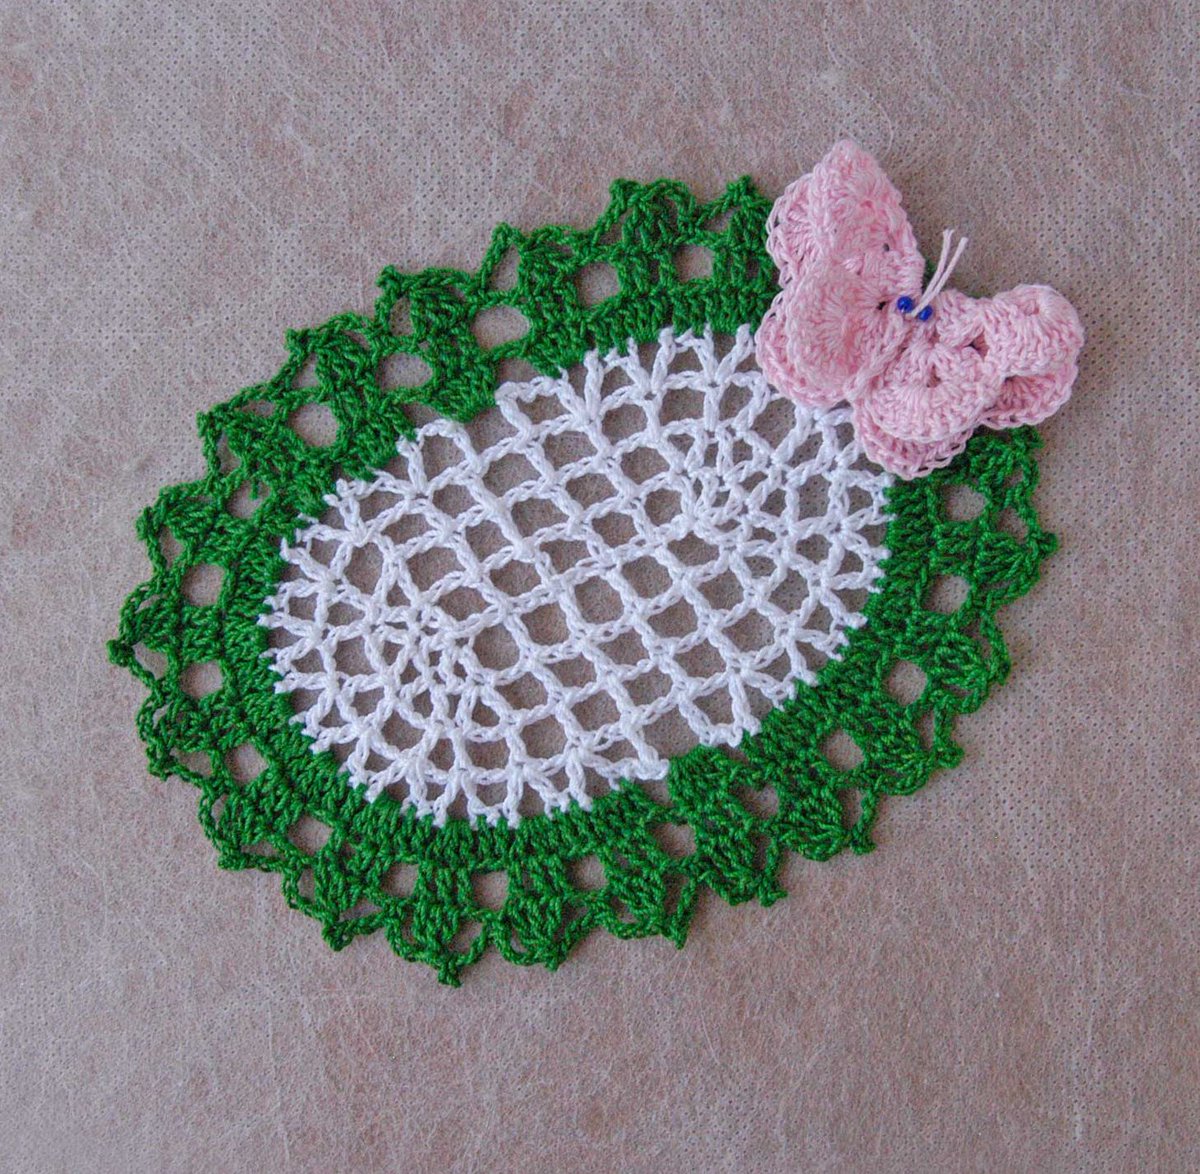 🌿🌿🌿 NEW in my Etsy Shop!
Pink Butterfly Decor Crochet Lace Doily
nutmegcottage.etsy.com/listing/169787… #etsy #pottiteam #thursdayvibes #gift #giftidea #etygifts #butterfly #buynow